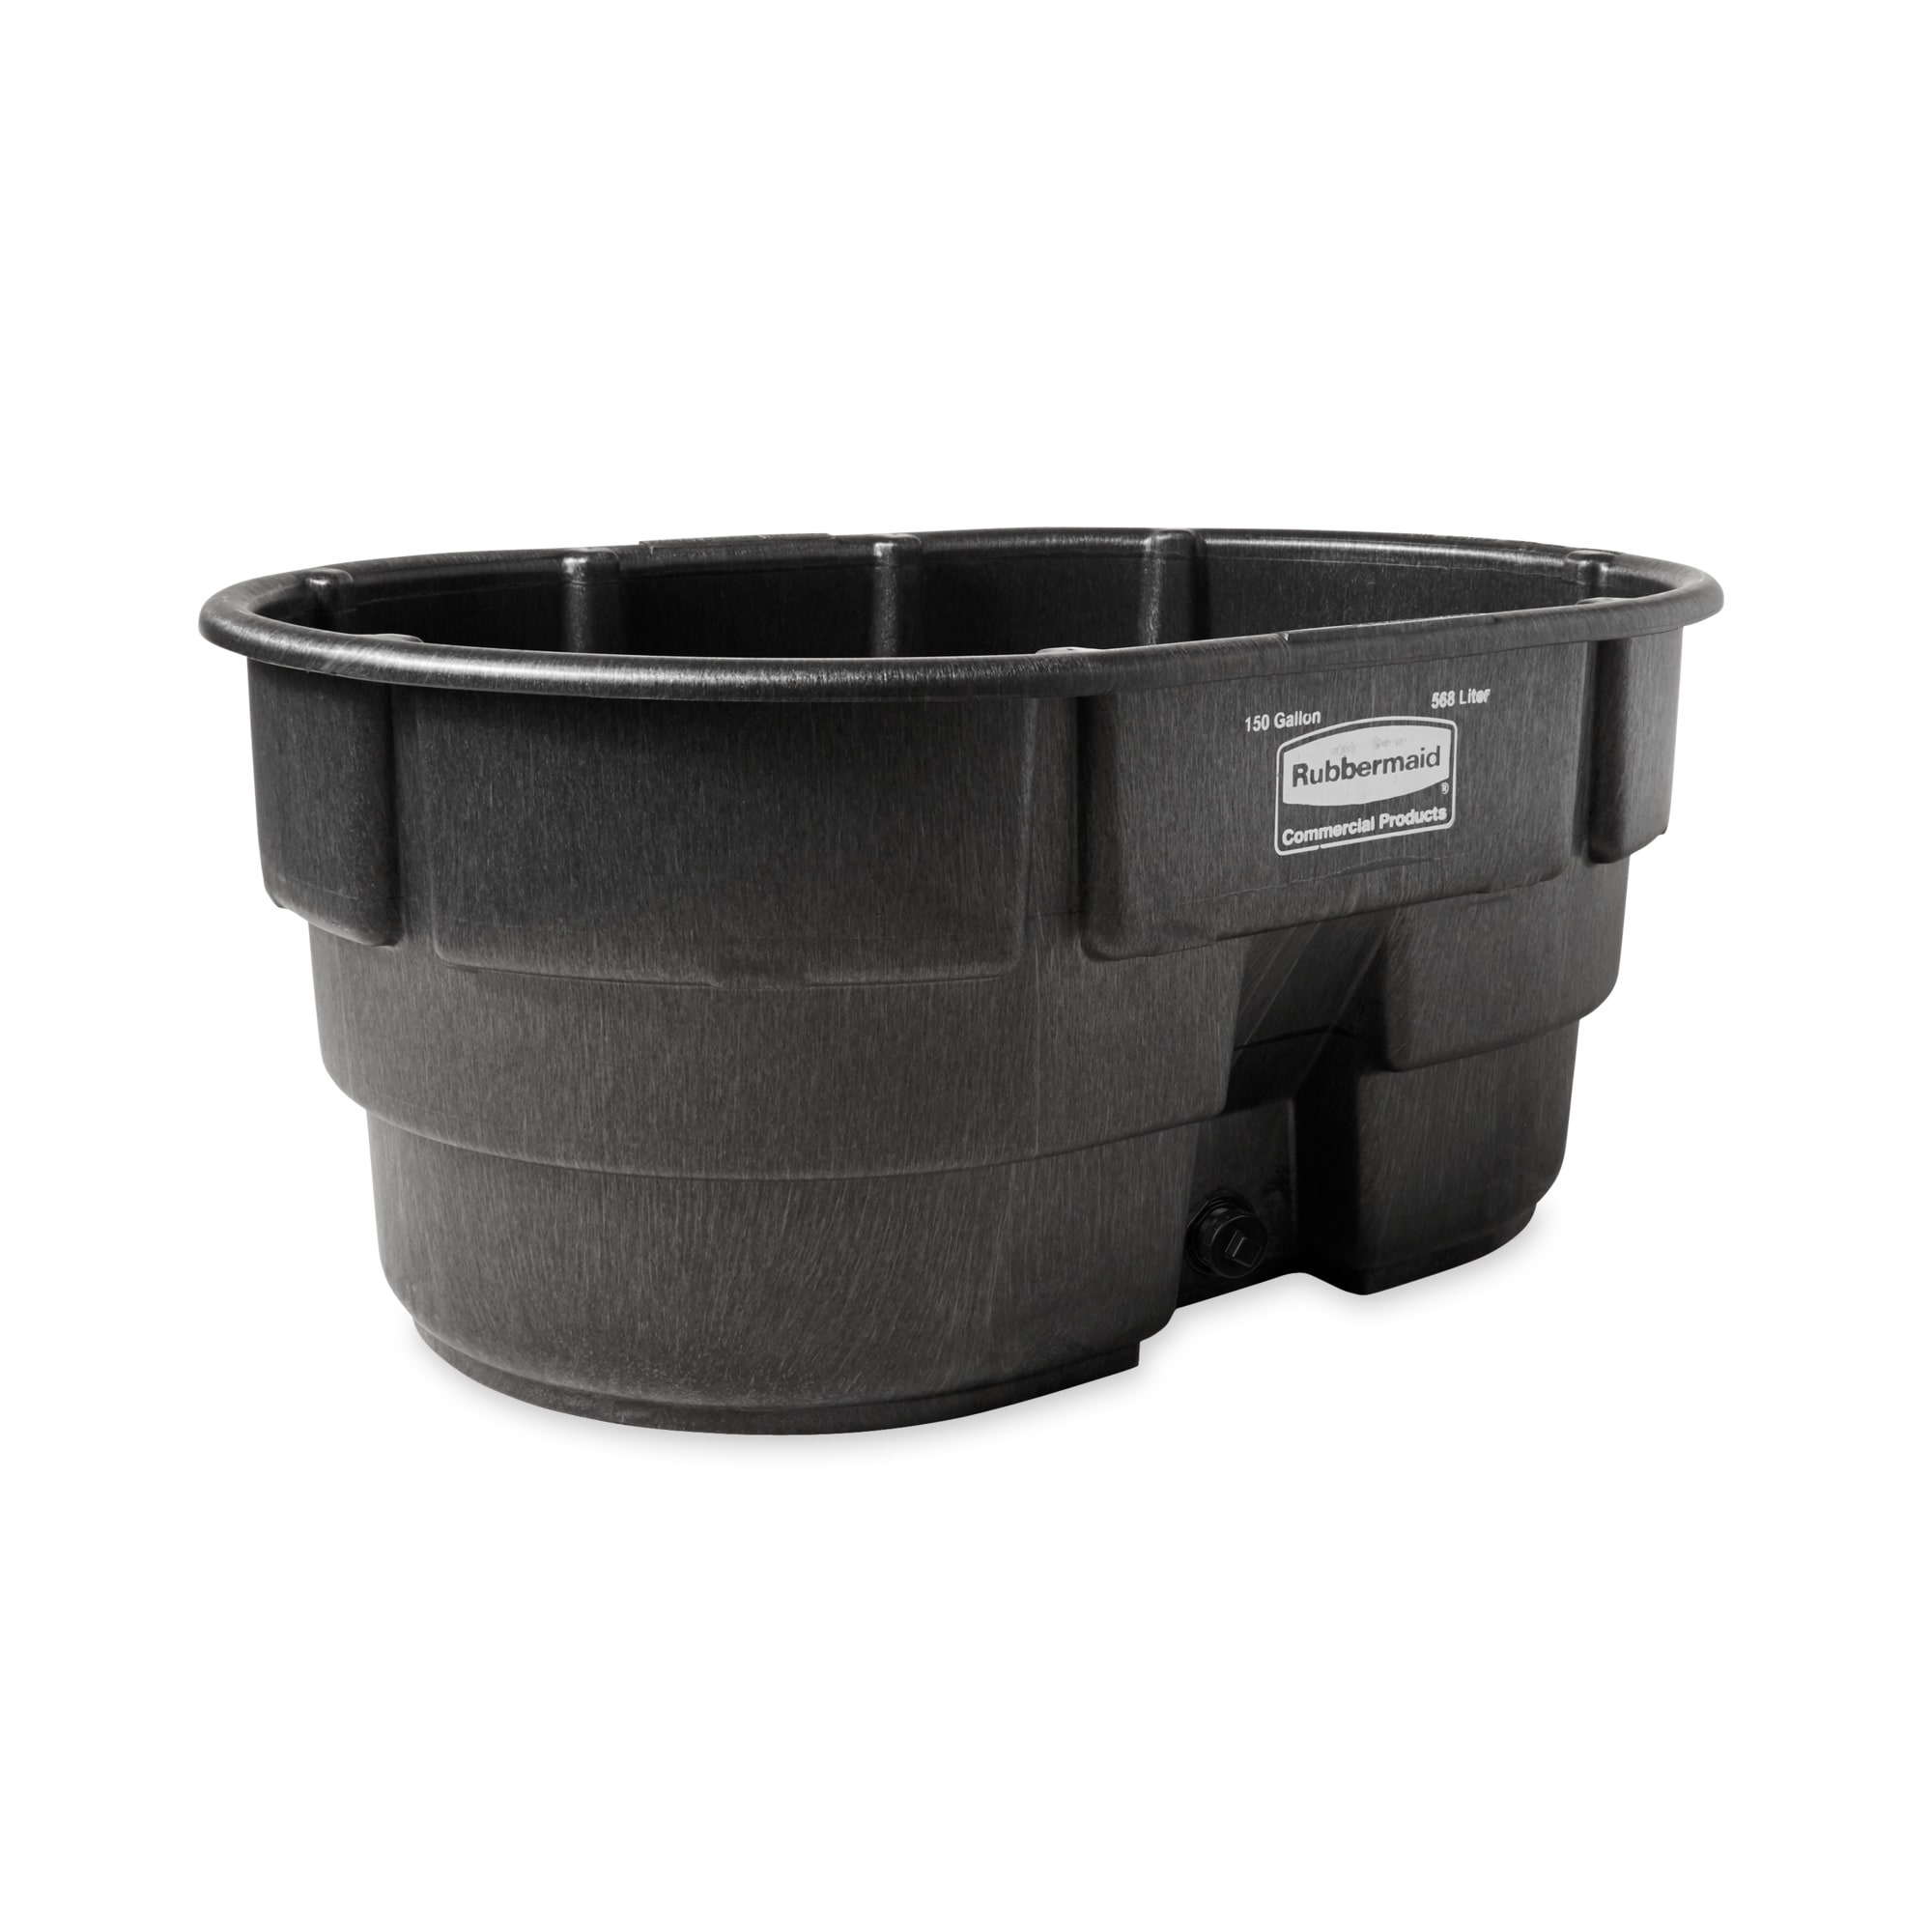 Rubbermaid Commercial Products Stock Tank, 50-Gallons, Structural